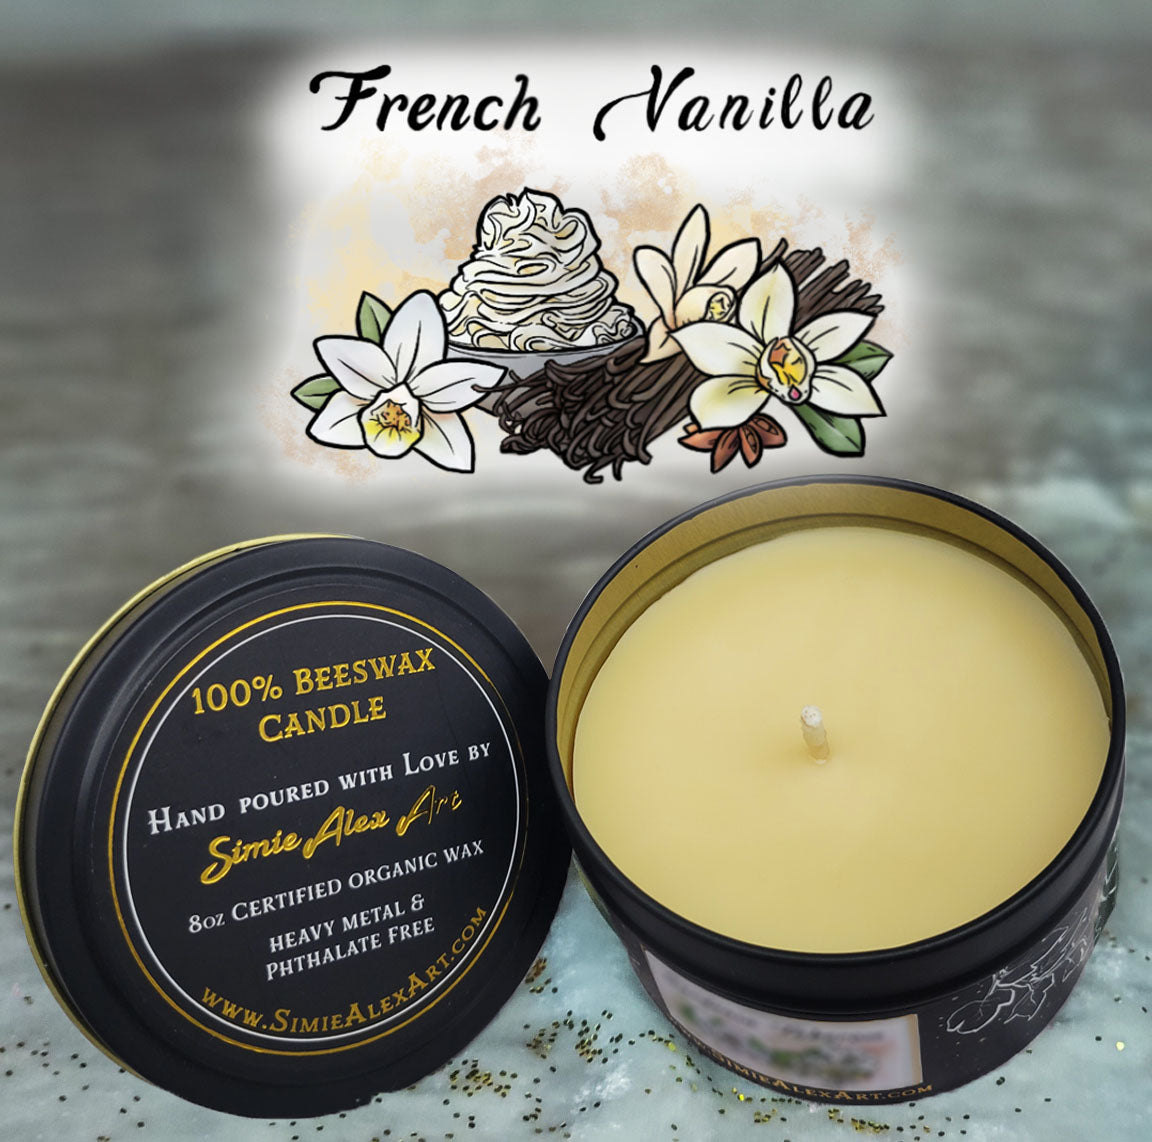 French Vanilla Beeswax Candle